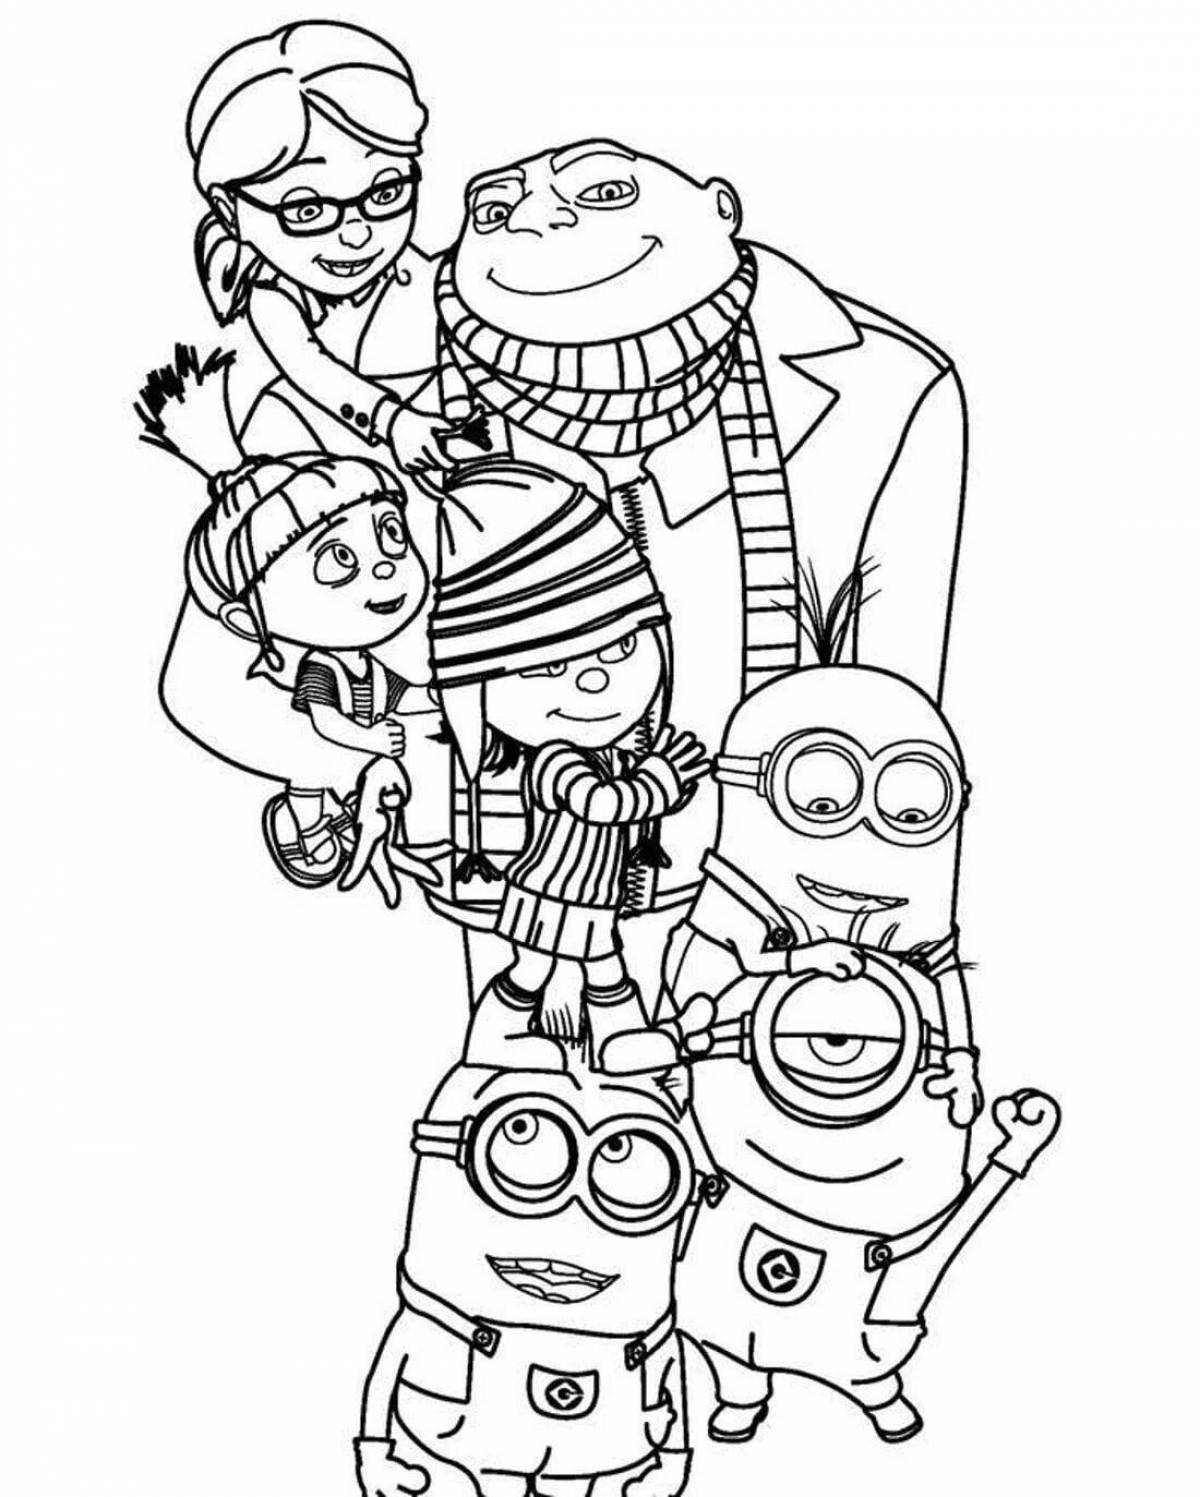 Minions amazing coloring book for girls